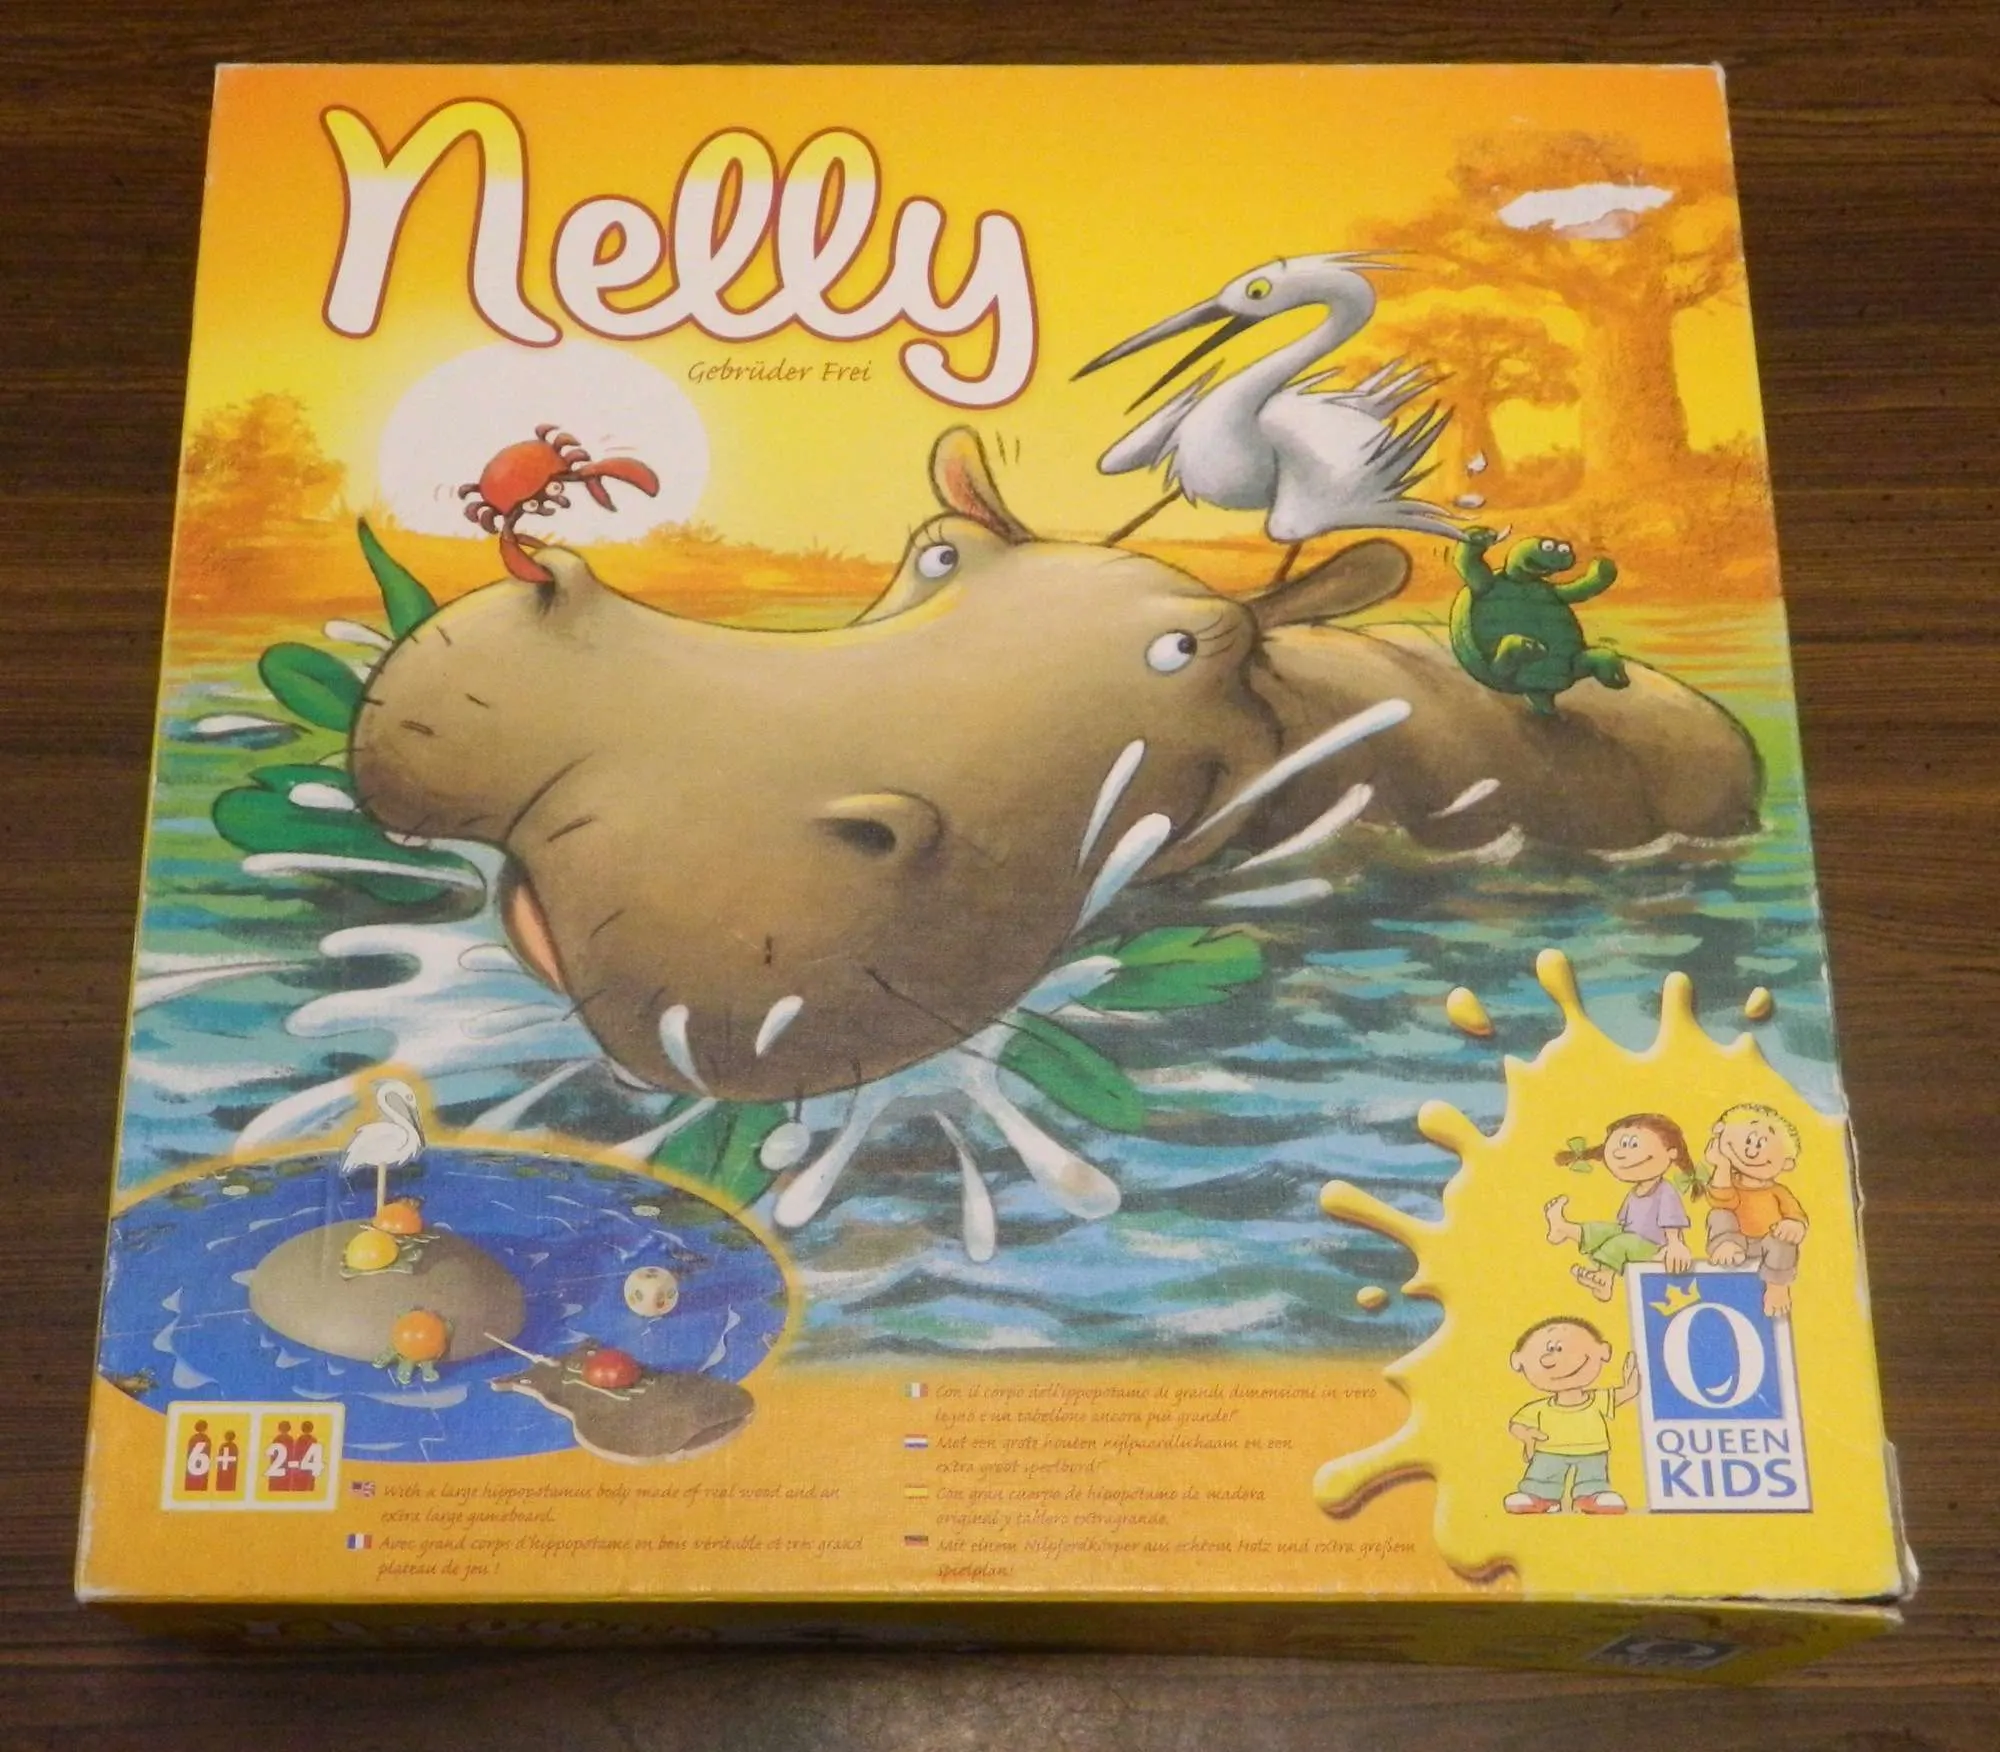 Box for Nelly